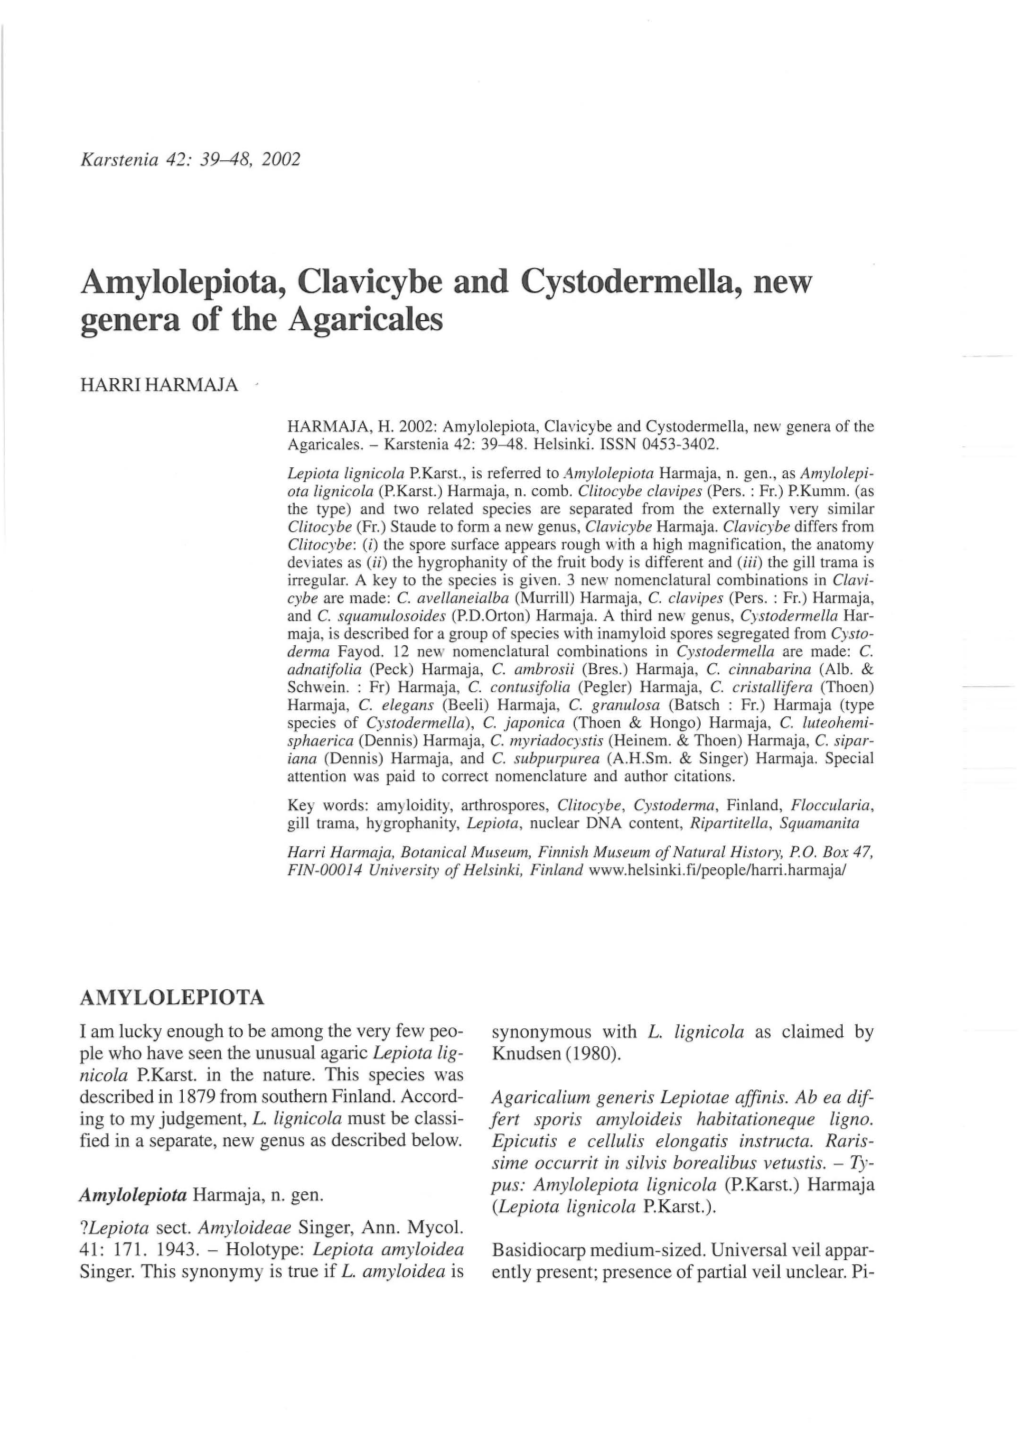 Amylolepiota, Clavicybe and Cystodermella, New Genera of the Agaricales